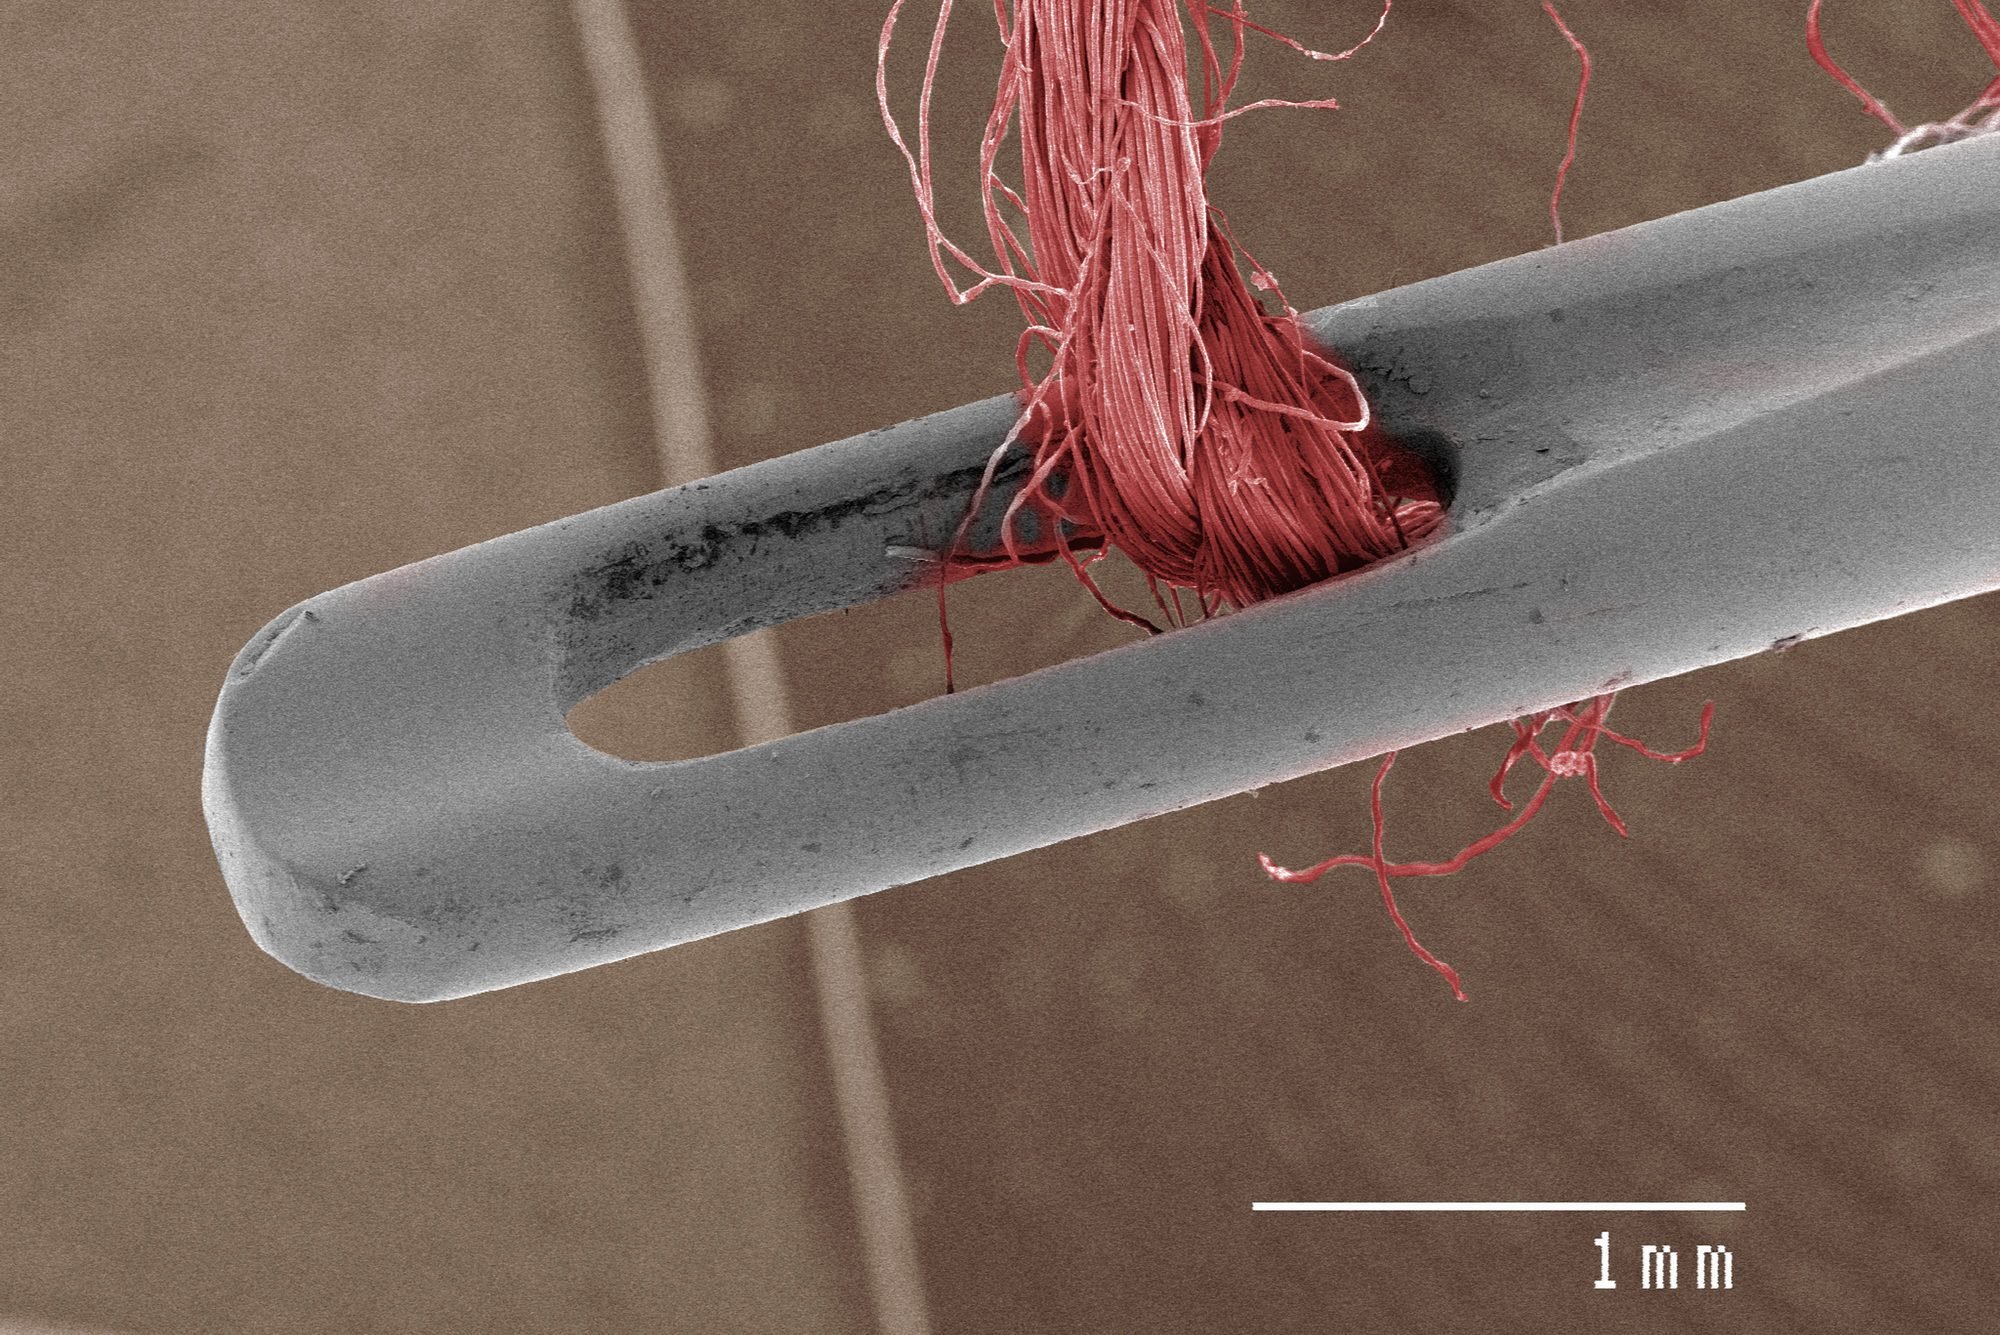 Coloured SEM of needle and thread